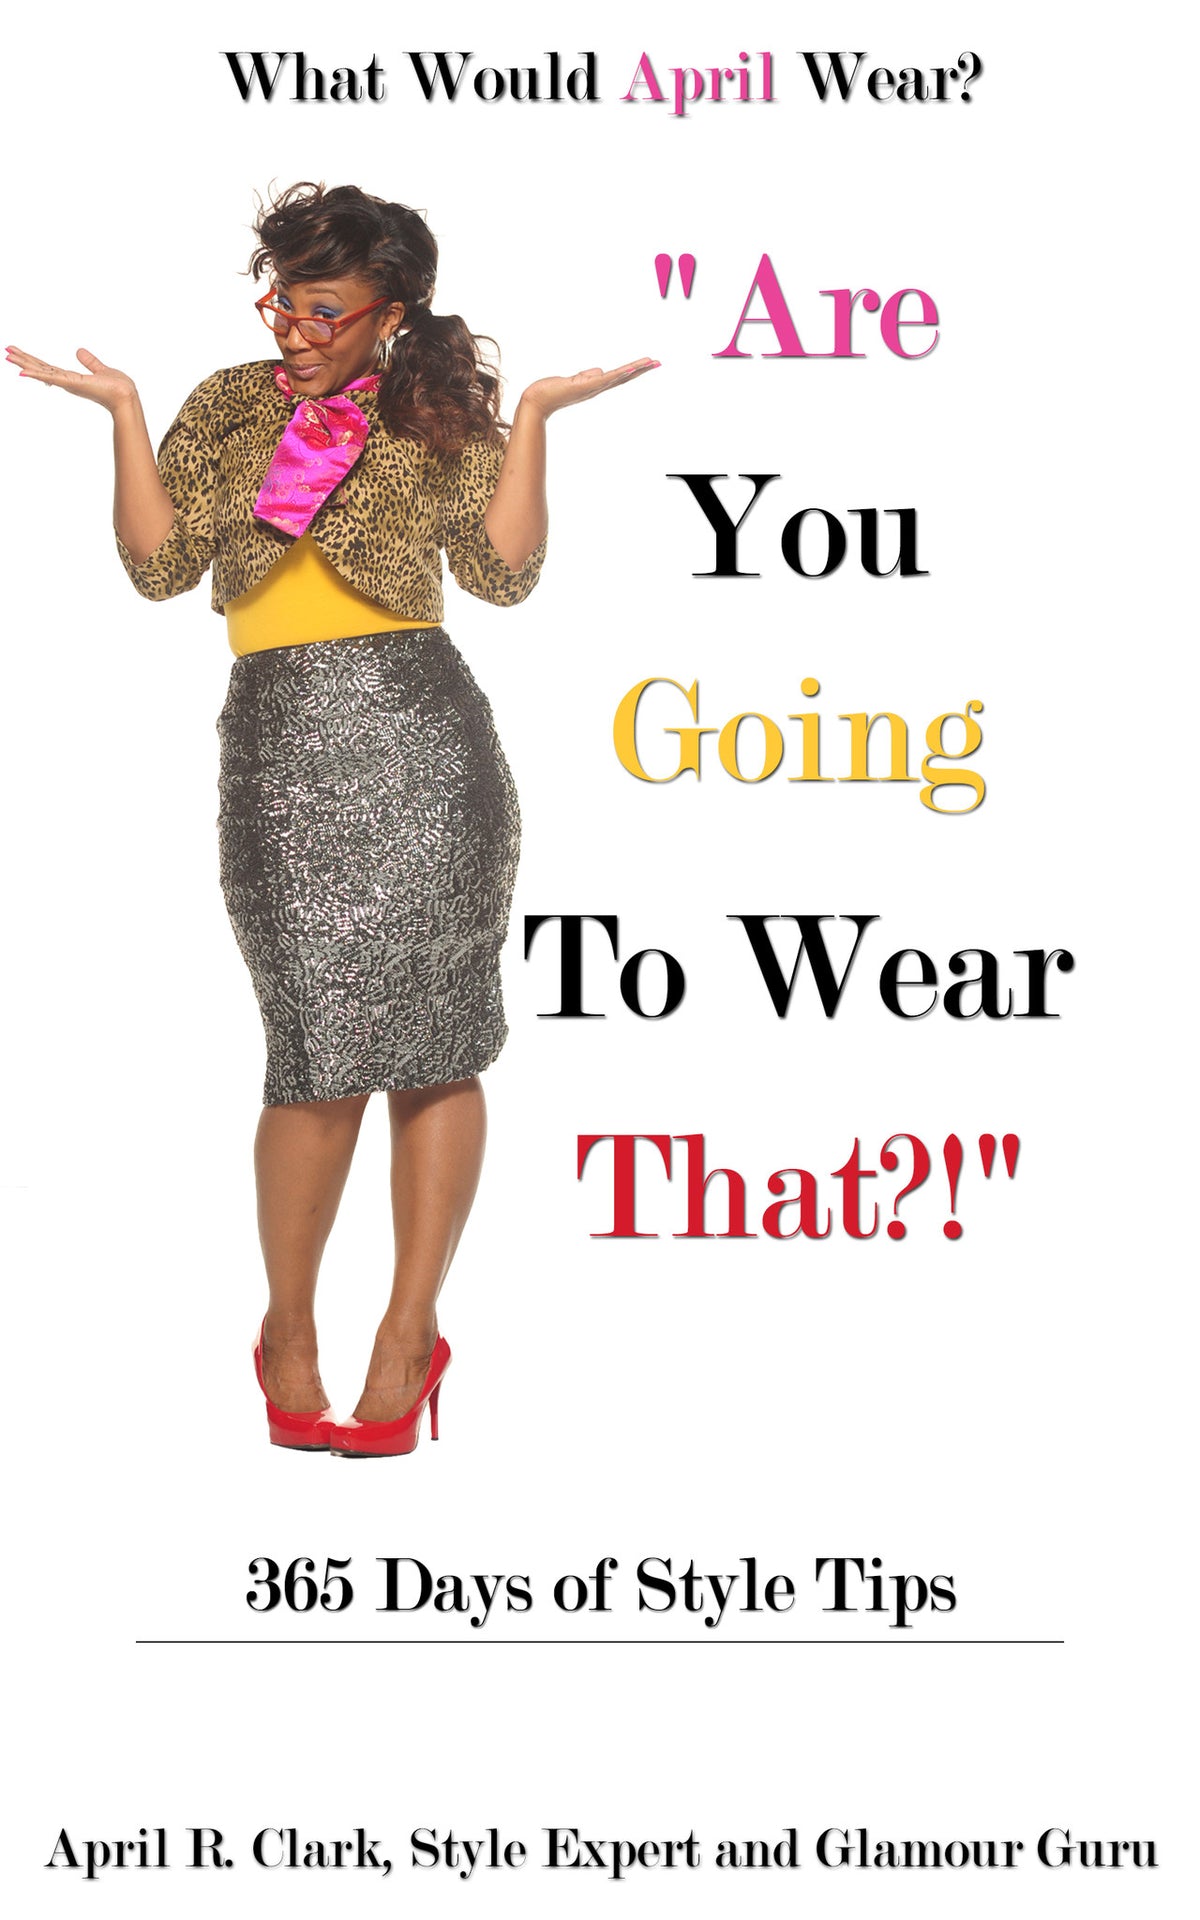 **BOOK SAMPLE** (DOWNLOAD) ARE YOU GOING TO WEAR THAT?! 365 DAYS OF STYLE TIPS